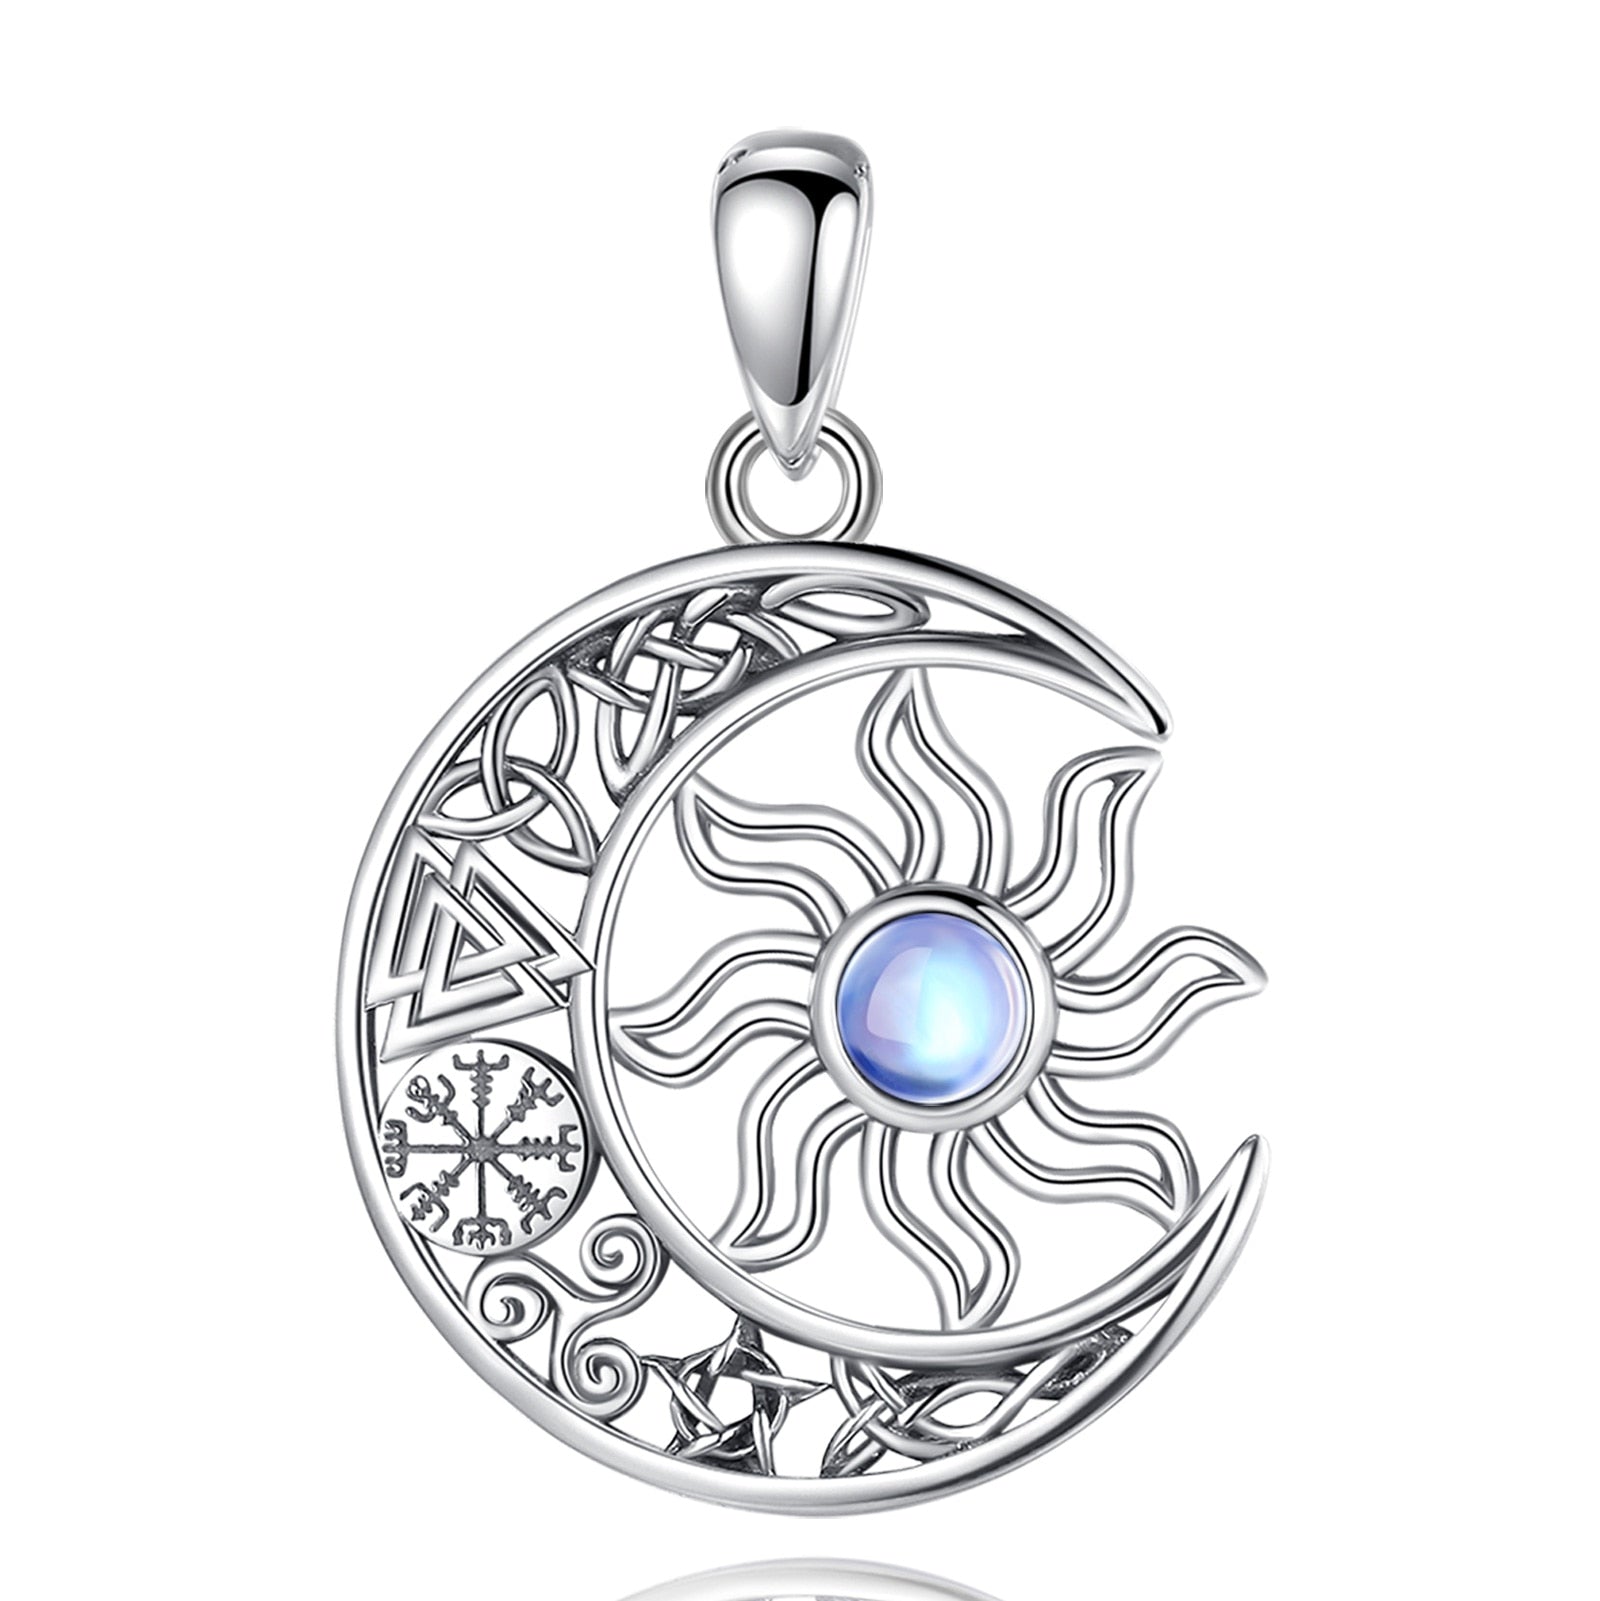 Sterling Silver Sun Moon Necklace Celtic knot Wiccan Necklace-MoonChildWorld